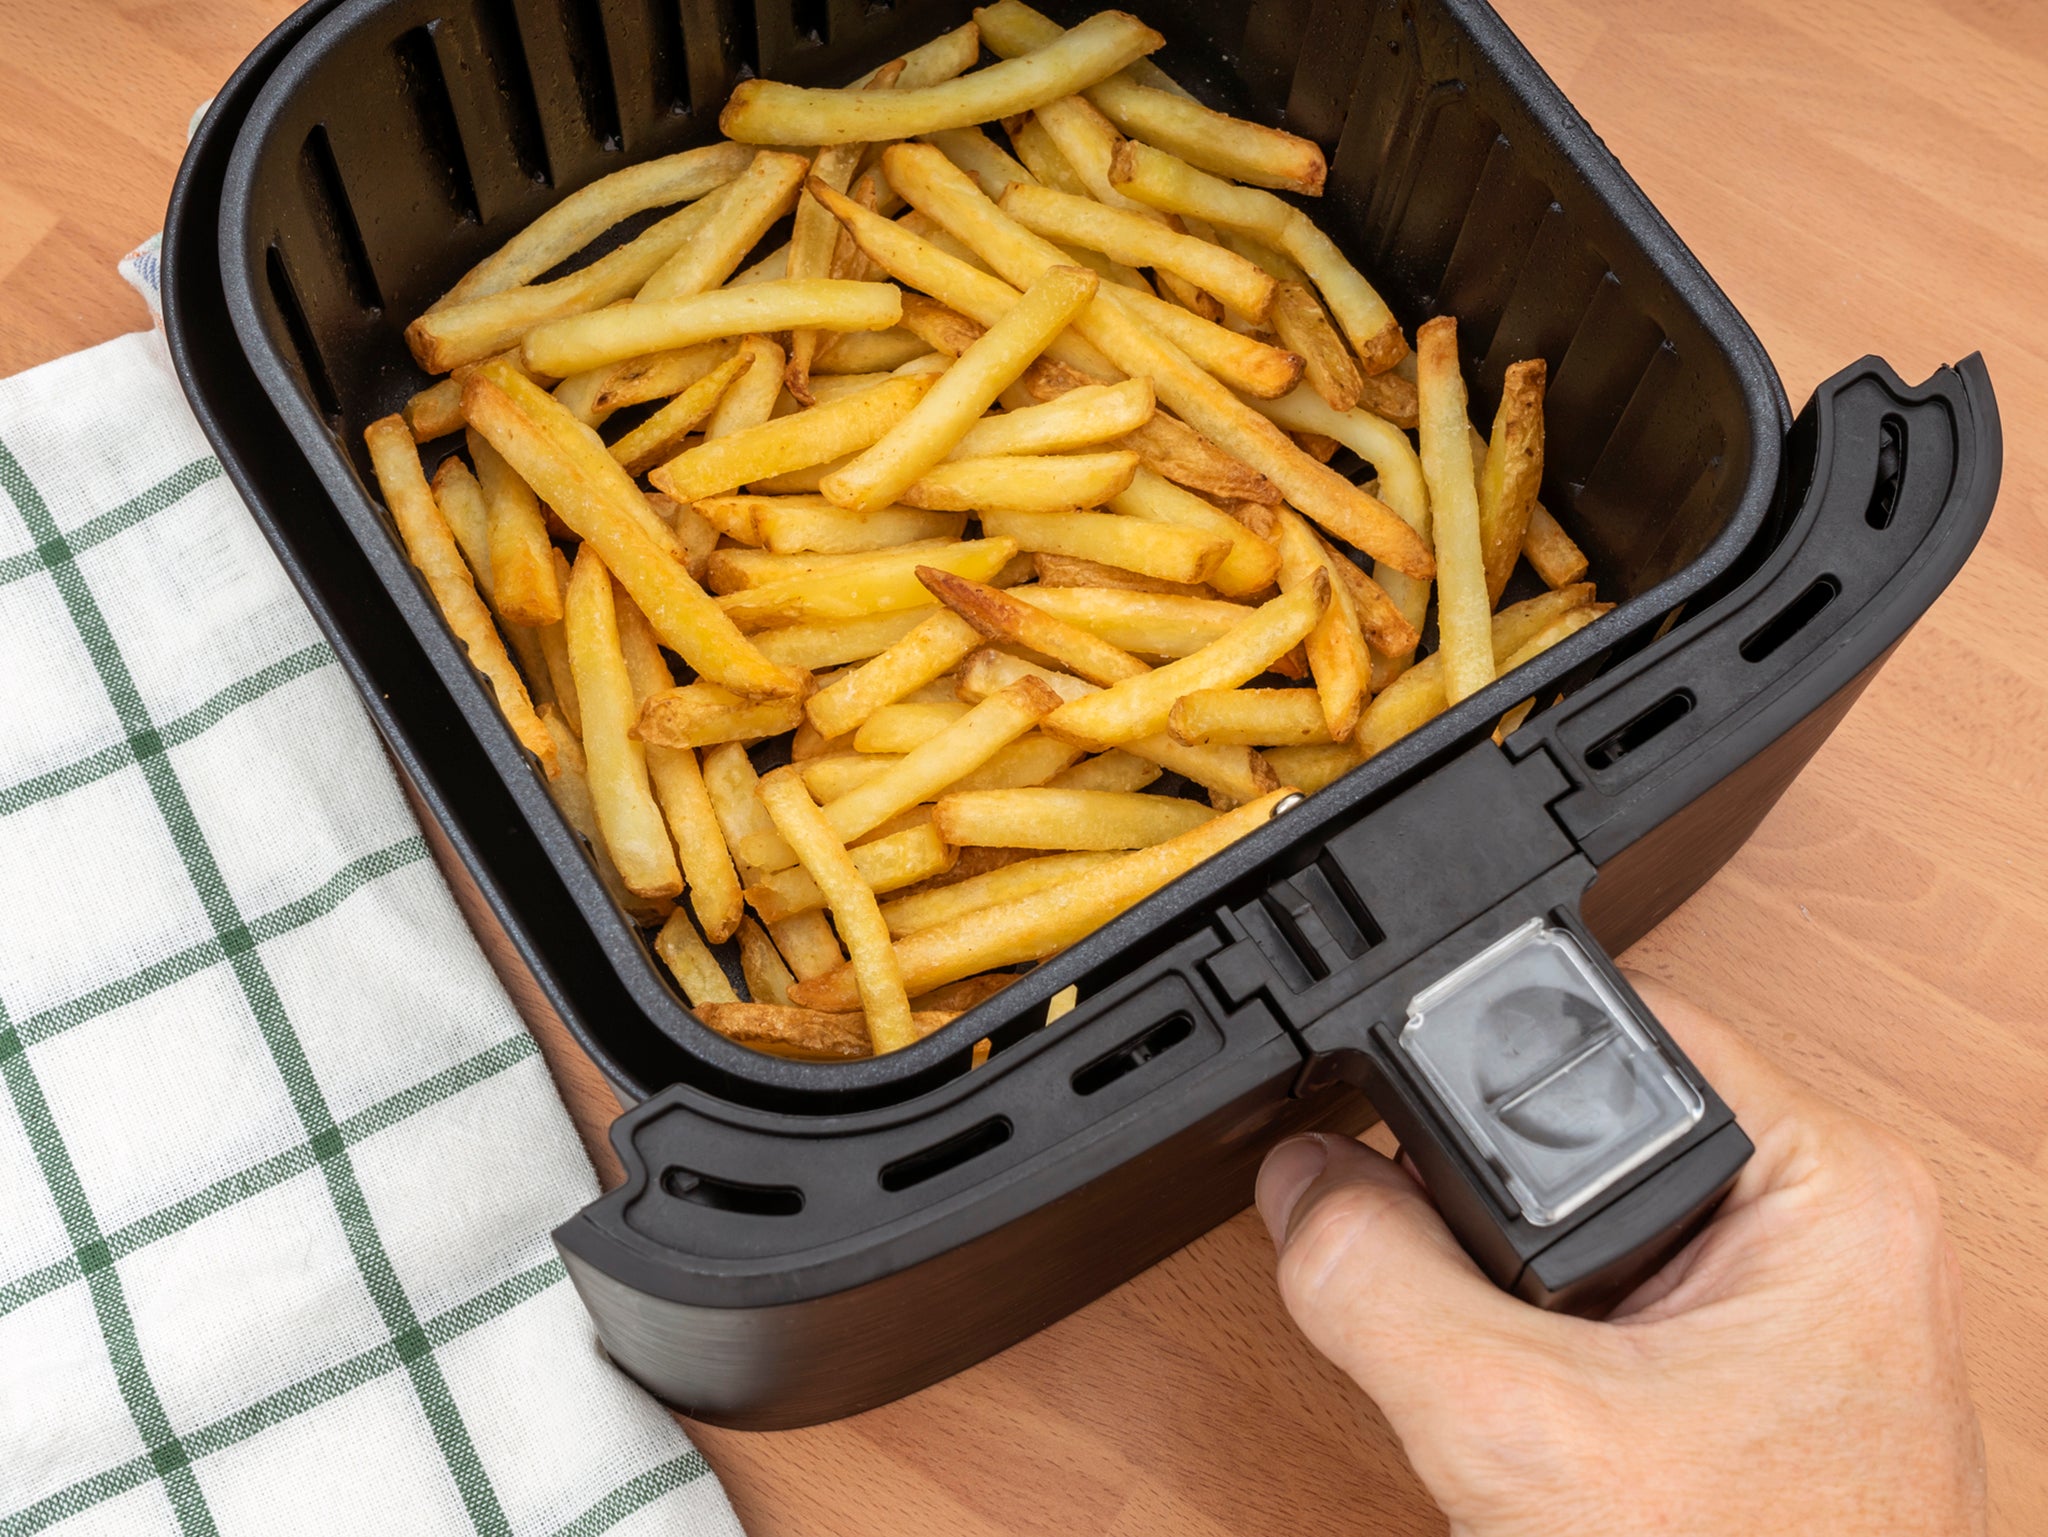 Golden, crispy French fries made to perfection in the air fryer